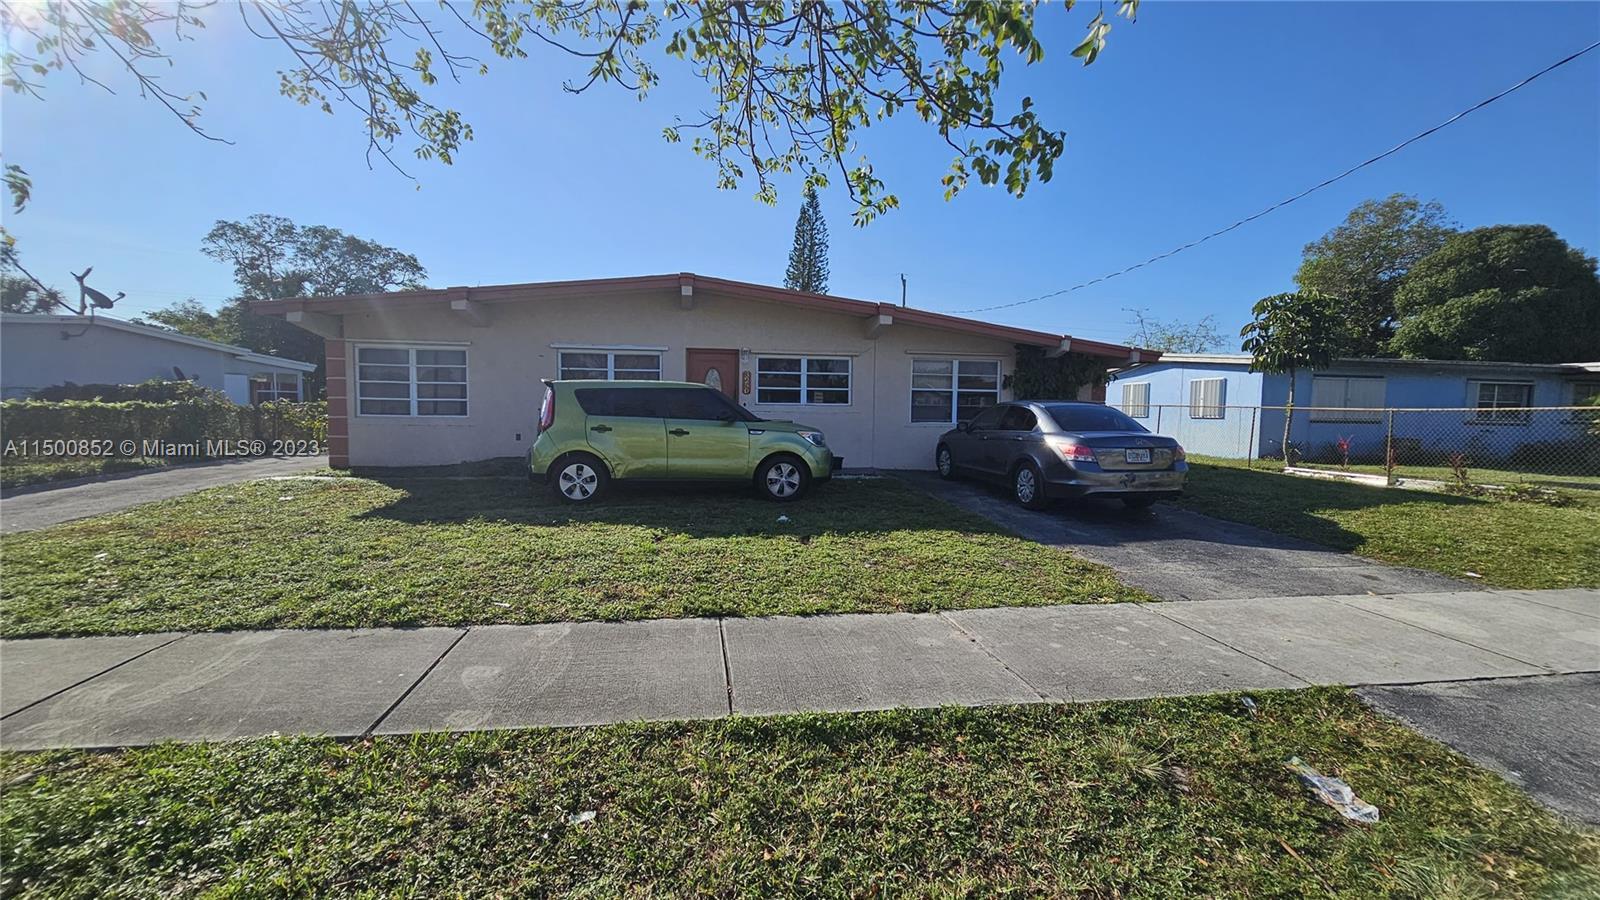 Photo of 3250 NW 4th St in Lauderhill, FL